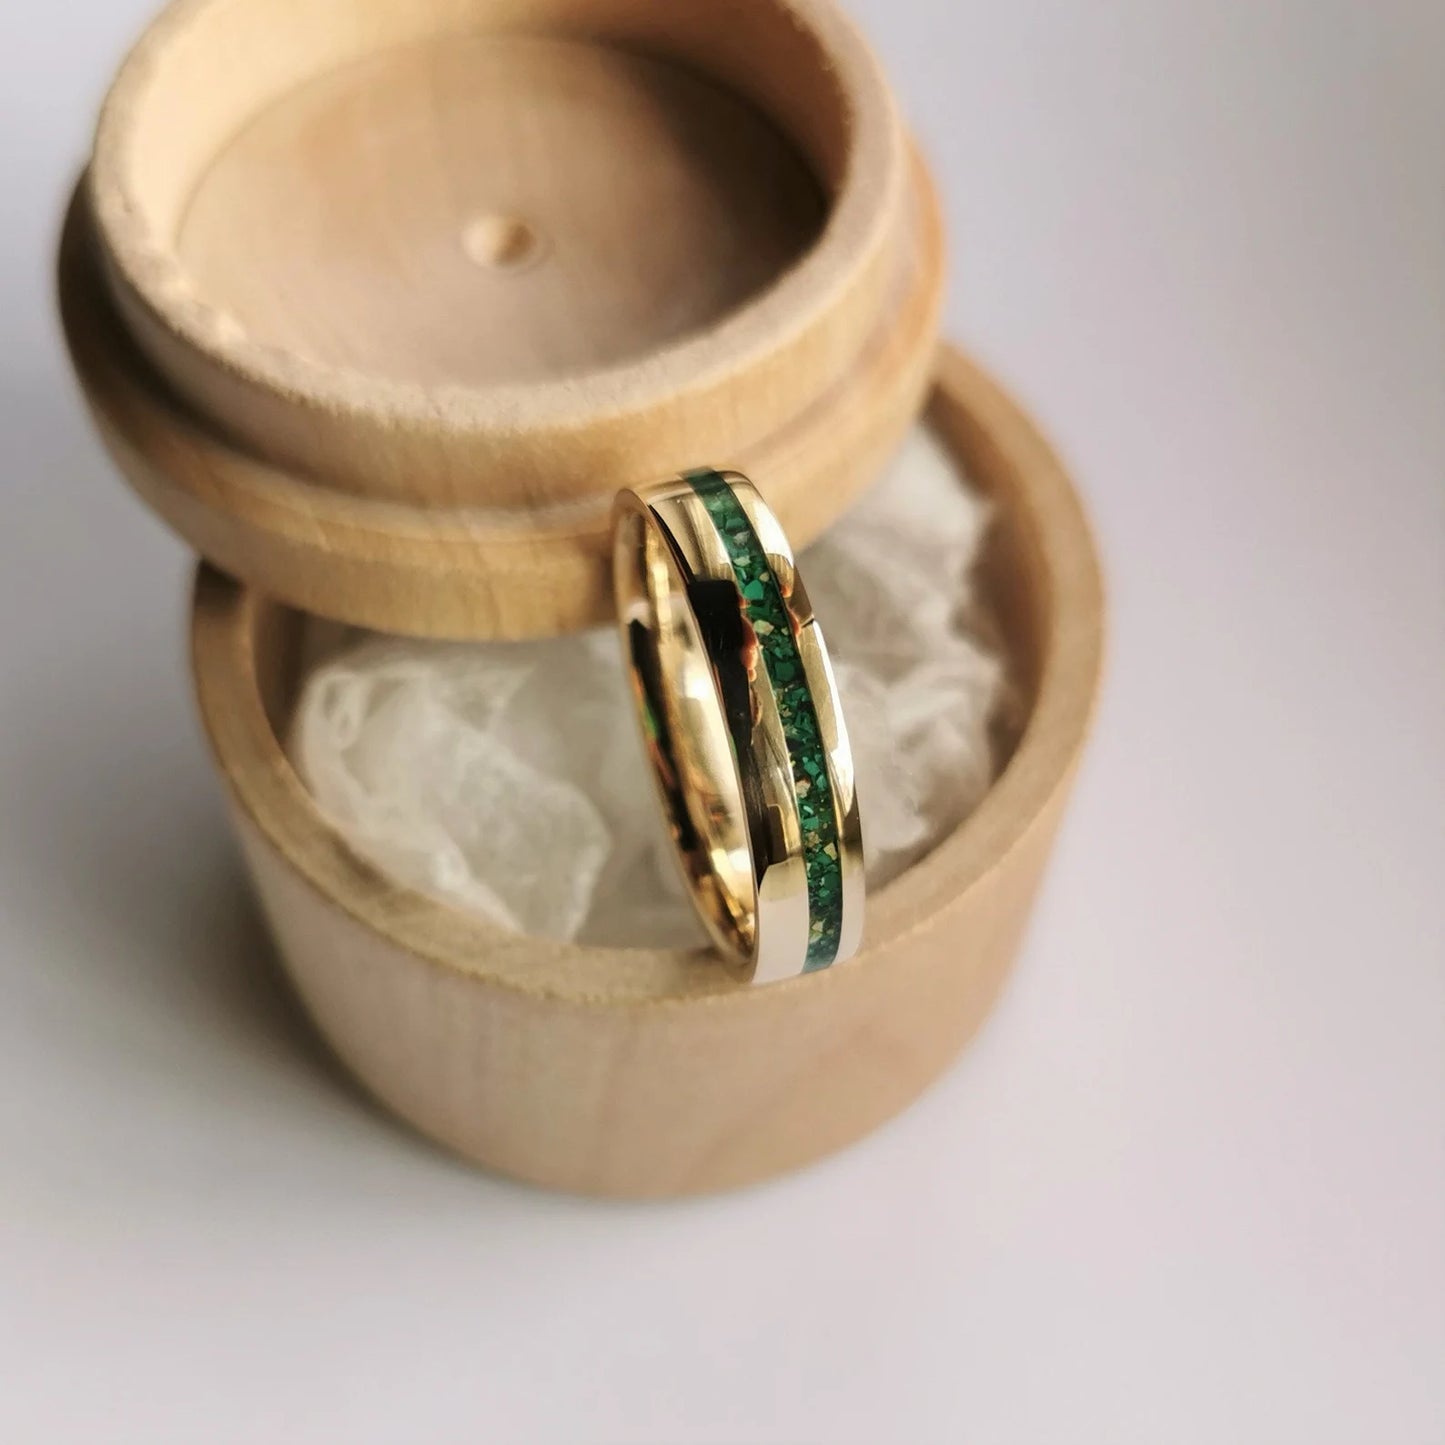 Handmade Solid Gold Band with Malachite and Aventurine Channel.